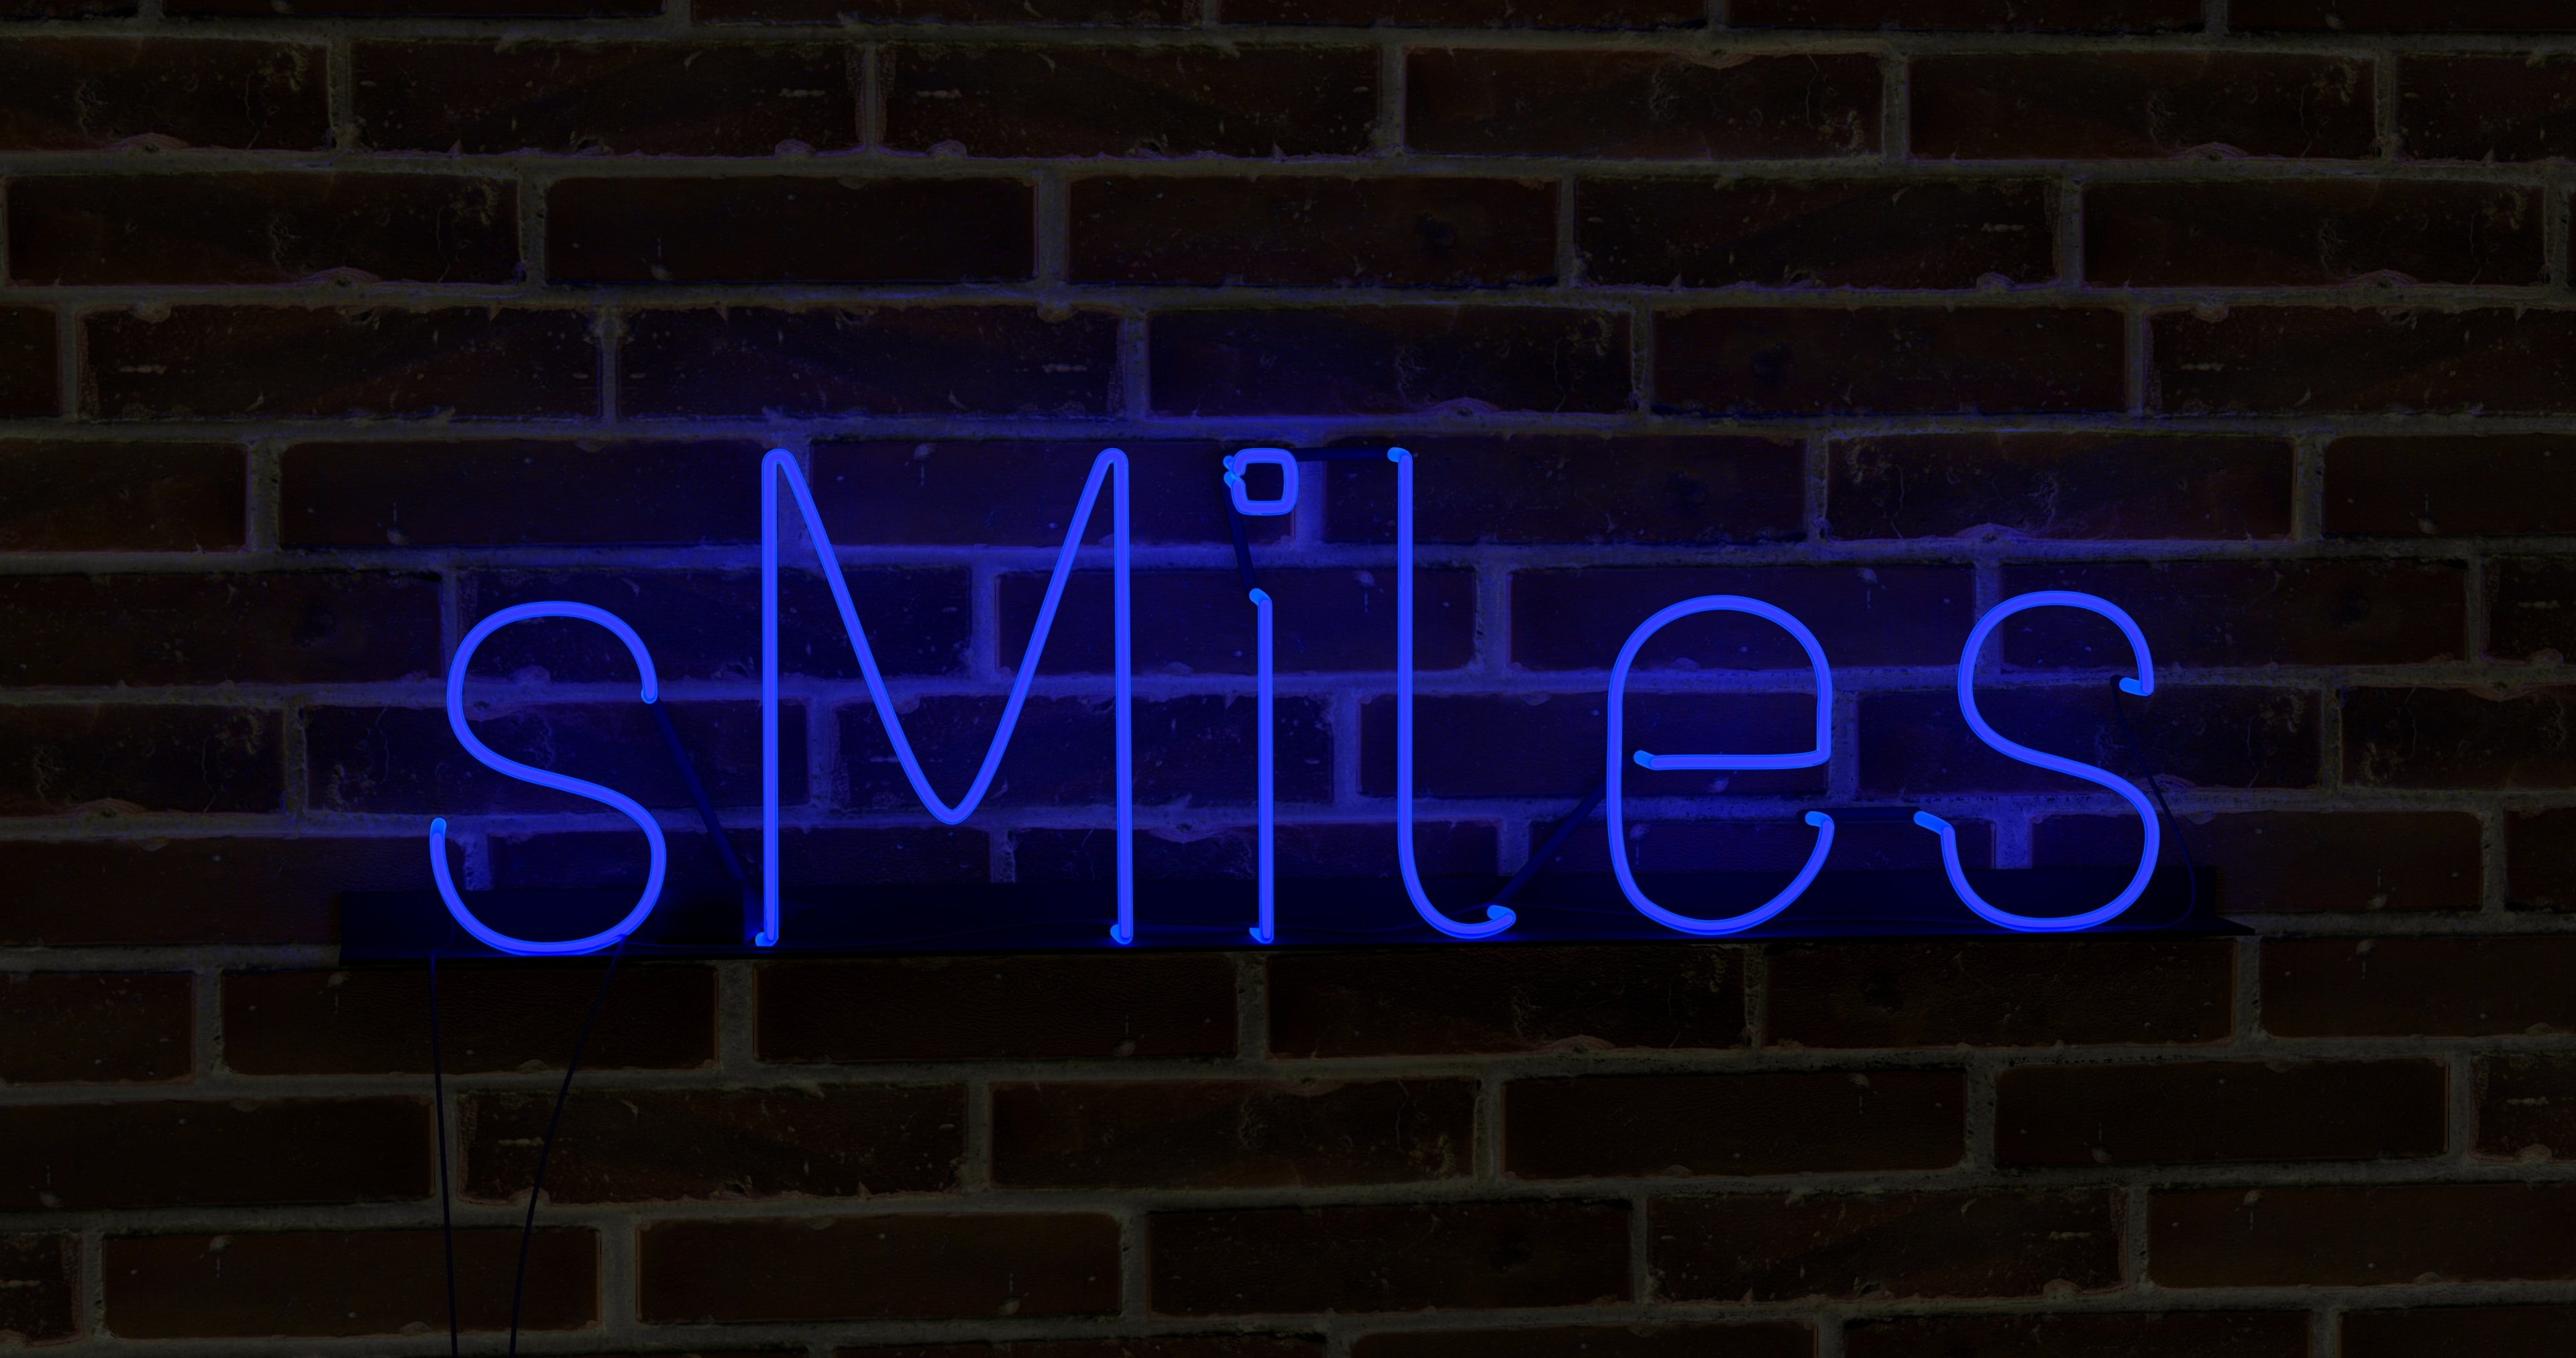 Smile text, sign, neon.